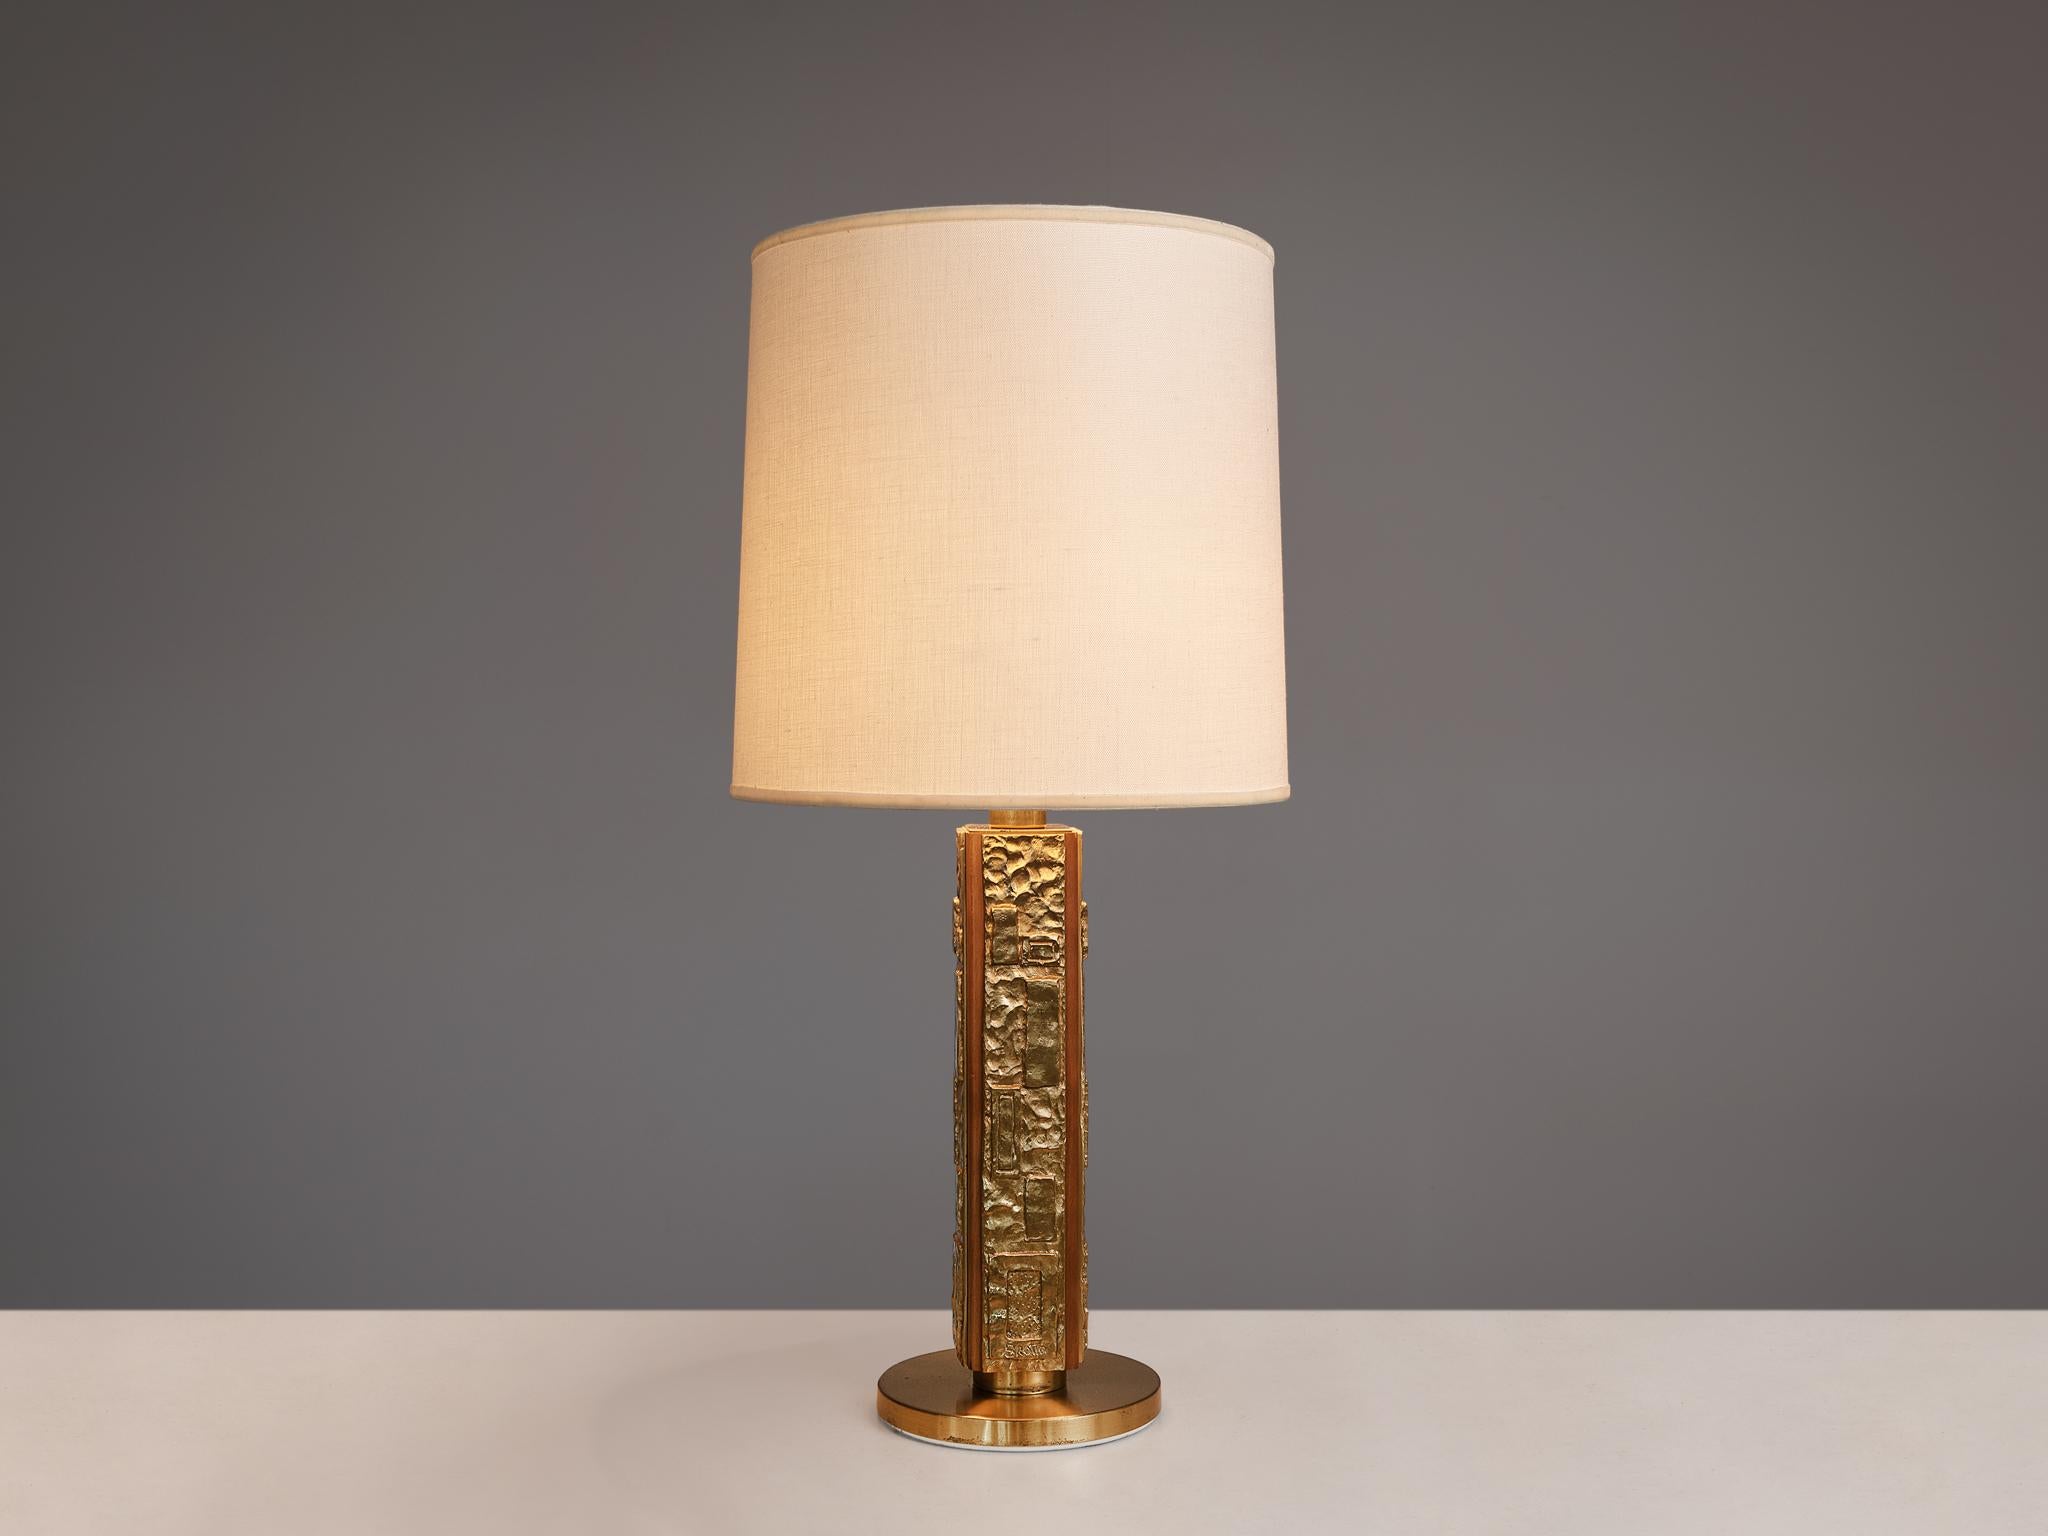 Angelo Brotto for Esperia, table lamp, model 'Margot', cast bronze, walnut, fabric, Italy, 1960s

Excellent table lamp designed by Angelo Brotto for Esperia. Its base and stem is executed in cast bronze and shows some remarkable sculptural details,